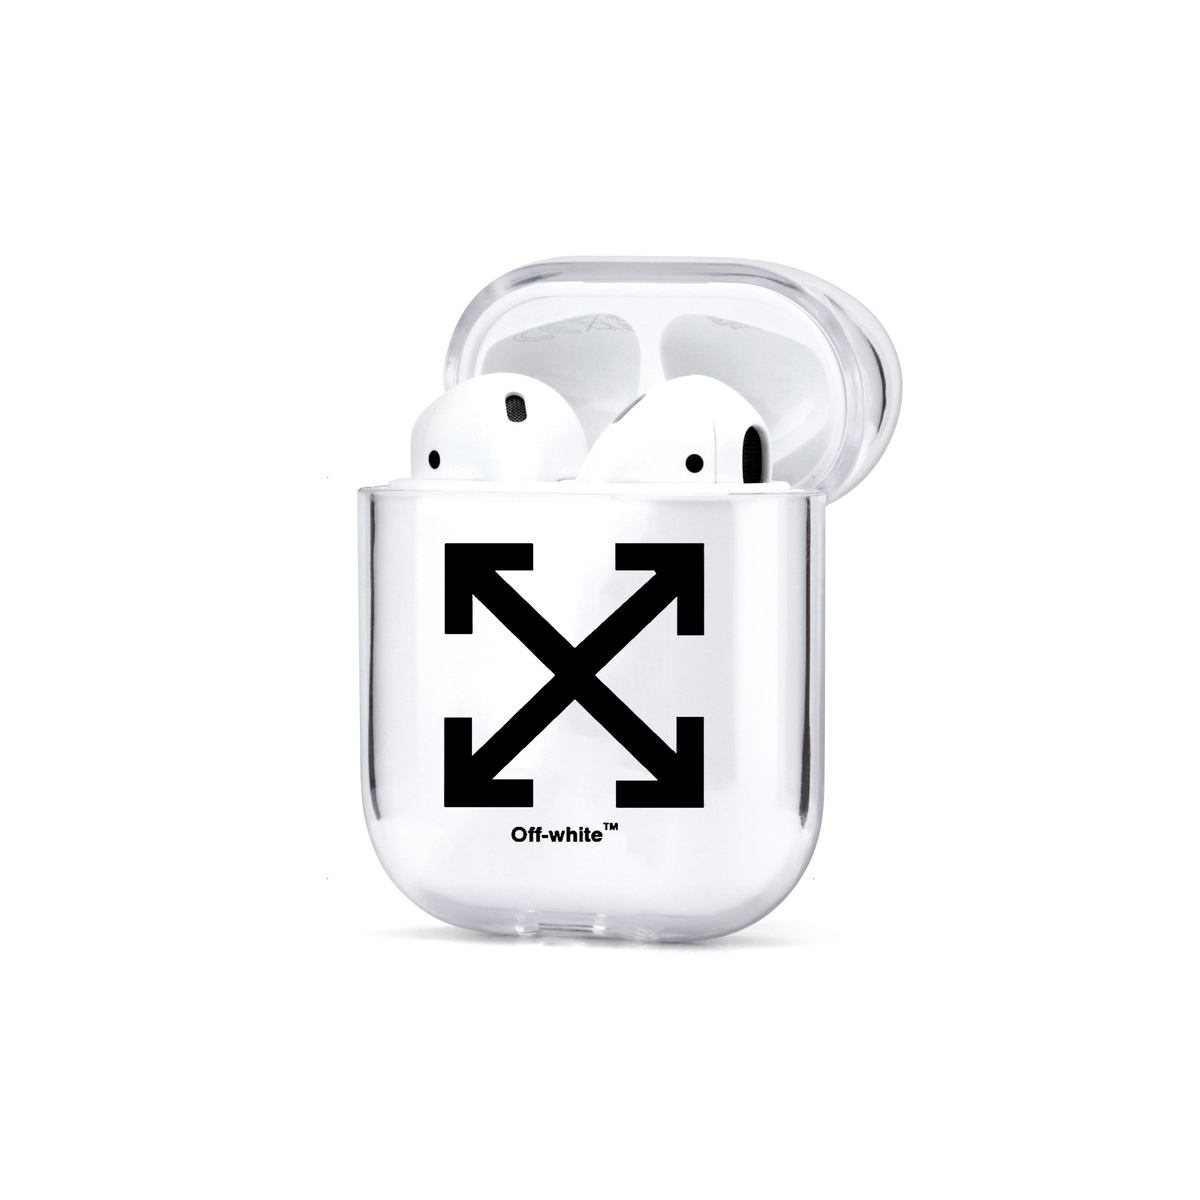 airpods case off white nike